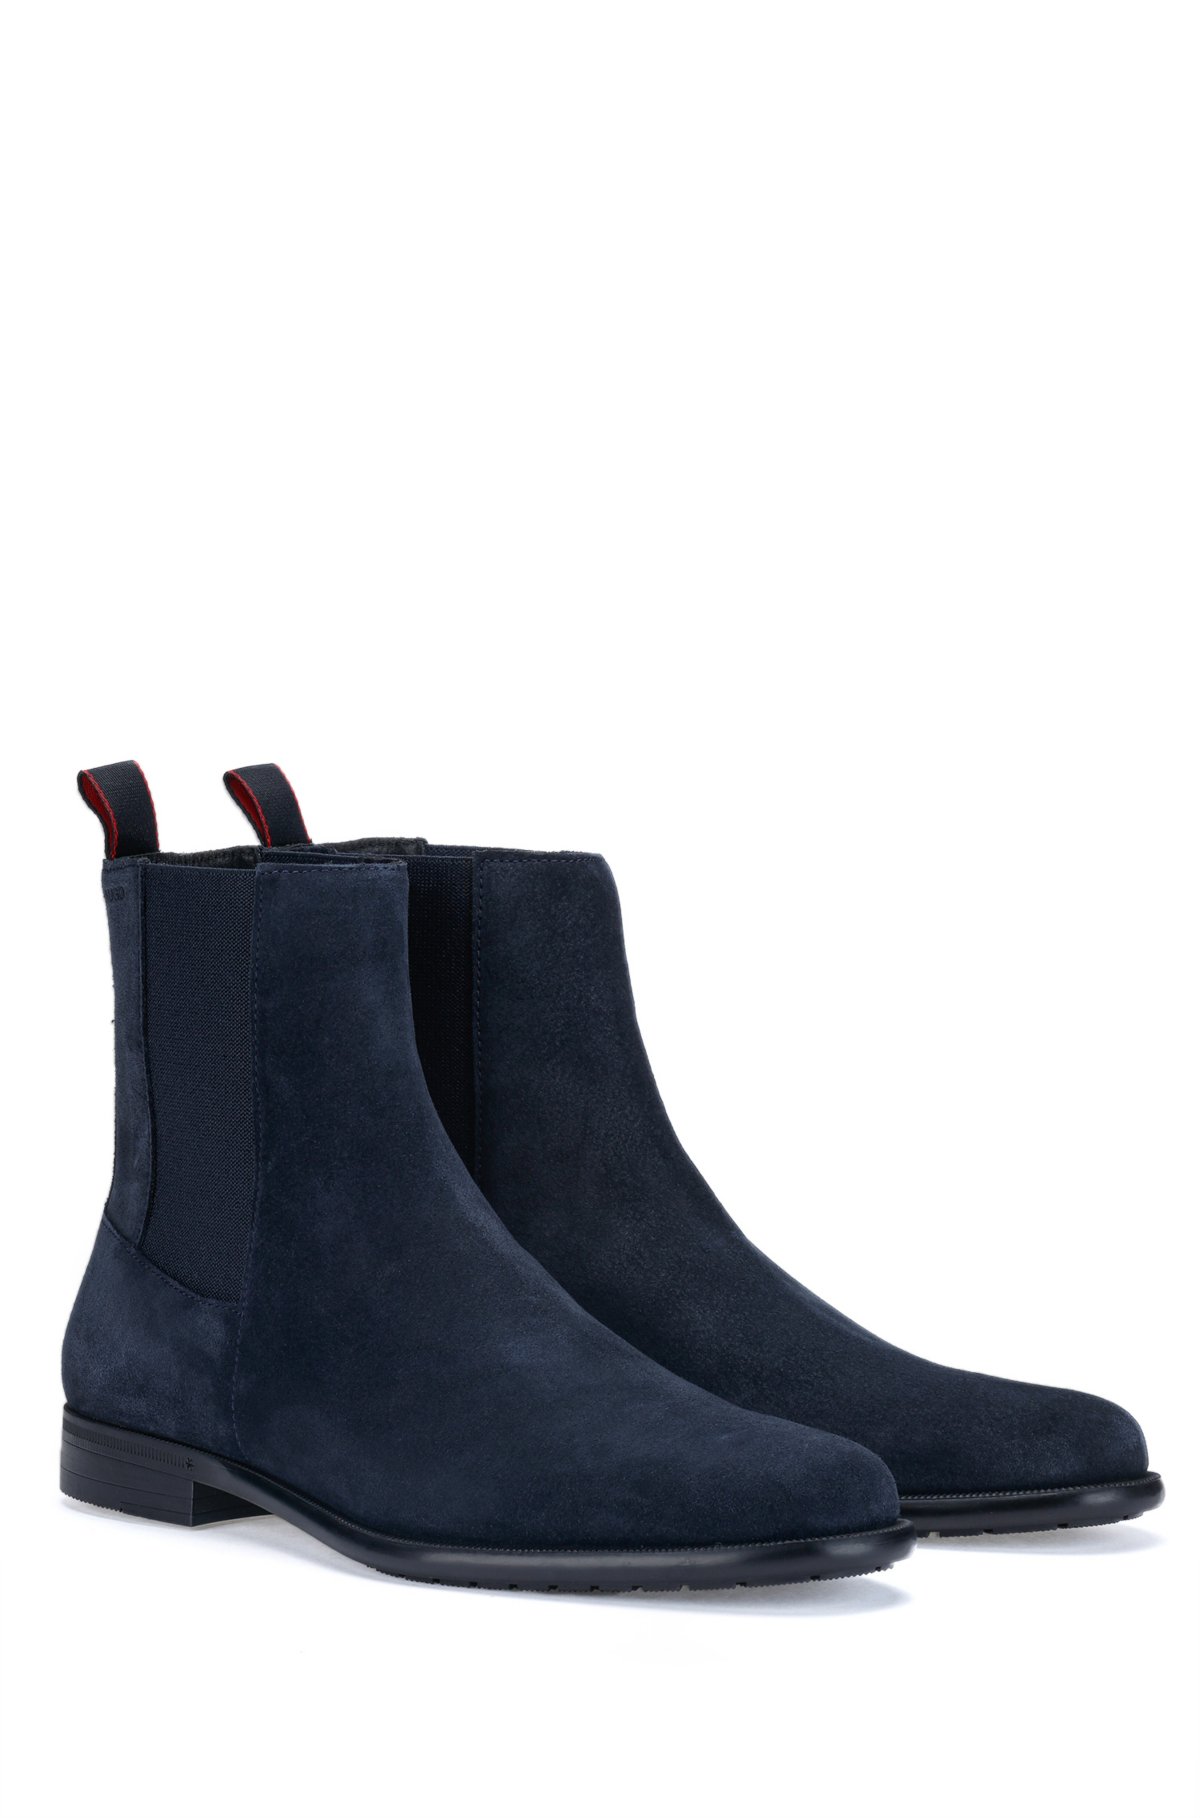 HUGO - Chelsea boots in suede with panels